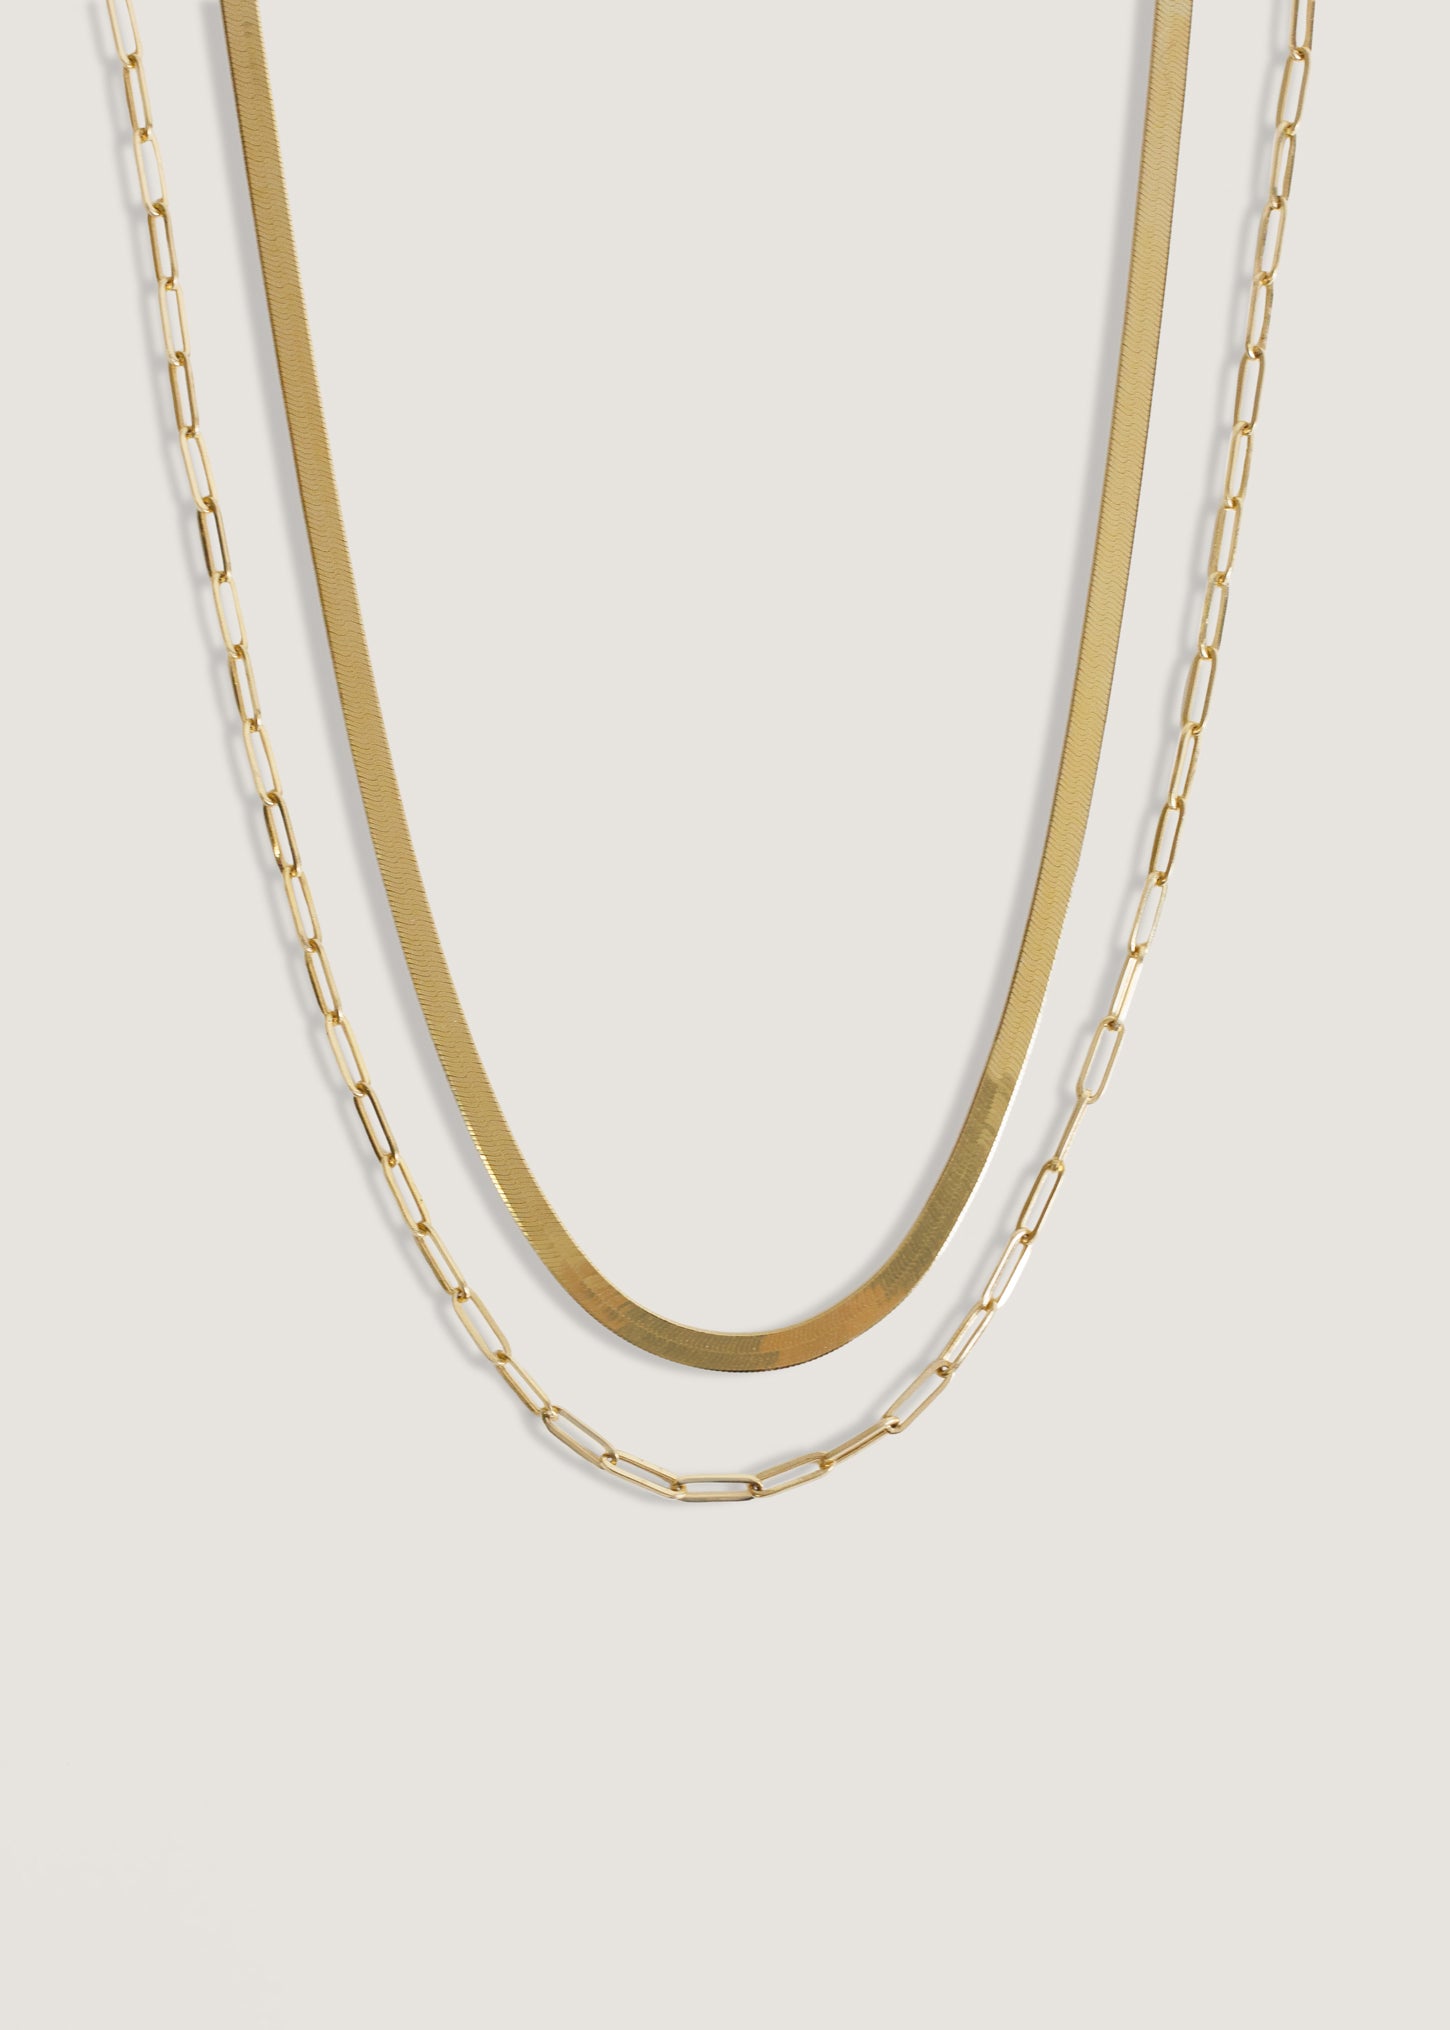 Carter Herringbone Chain & Paperclip Link Chain Necklace Stack